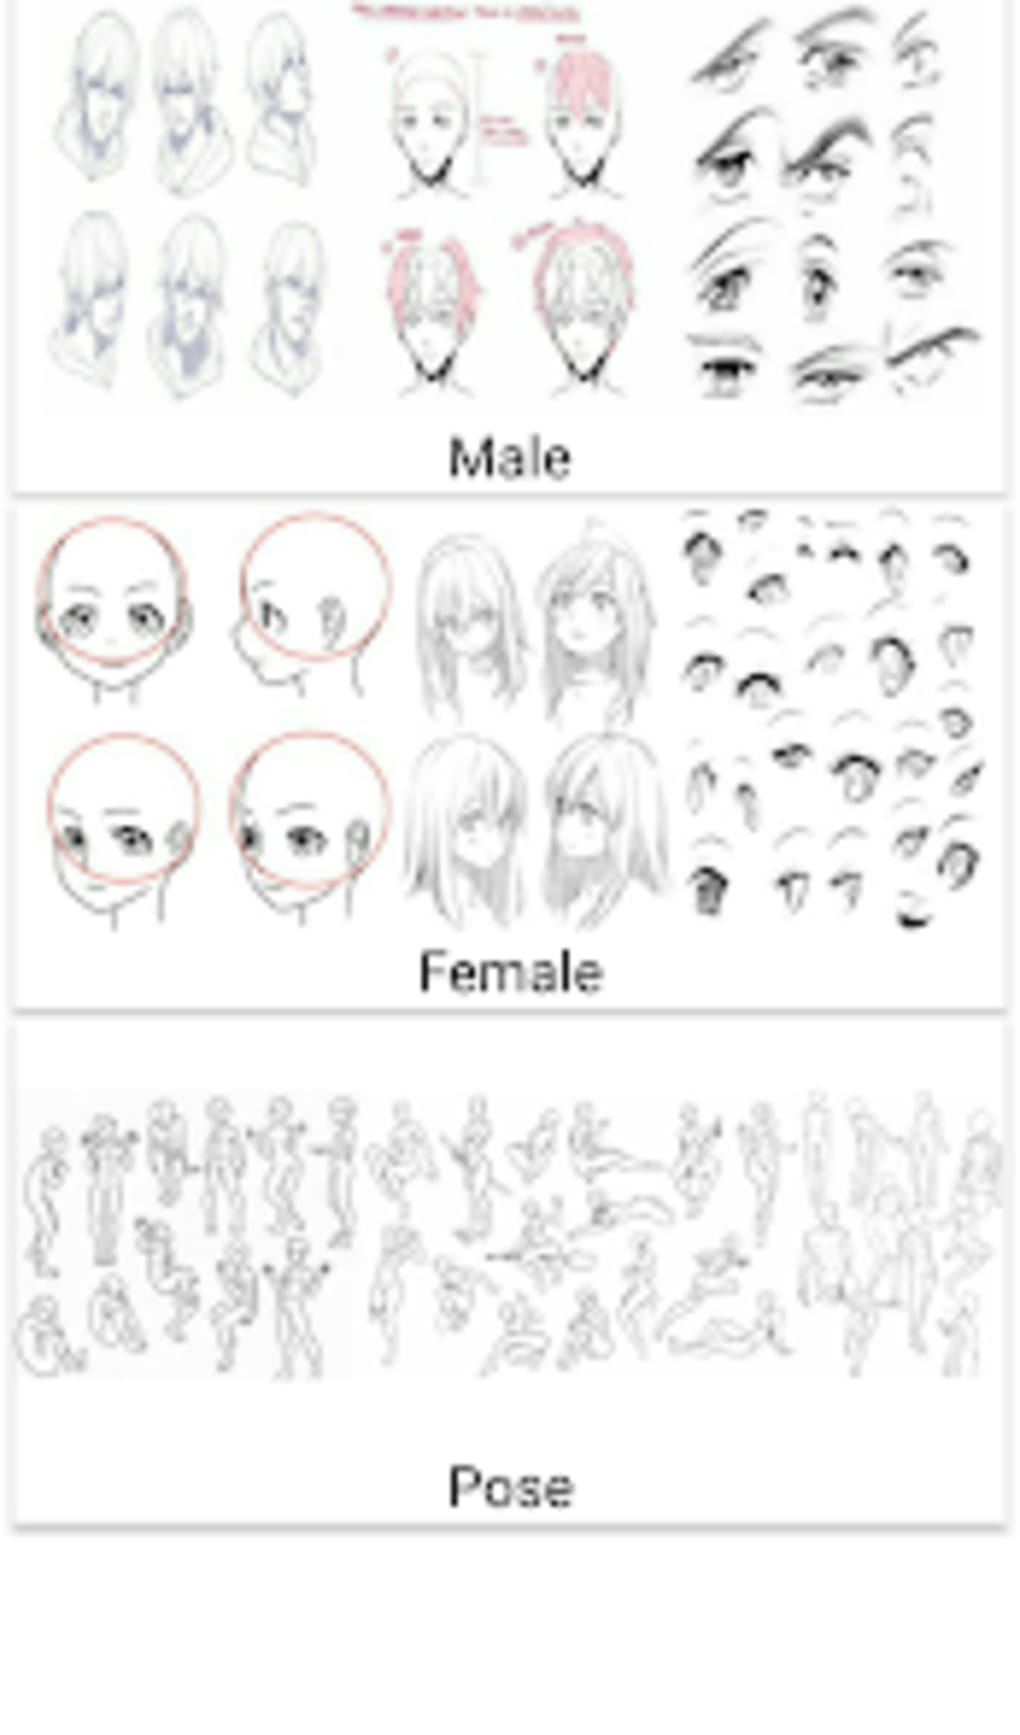 male poses reference for drawing - Anime Bases .INFO